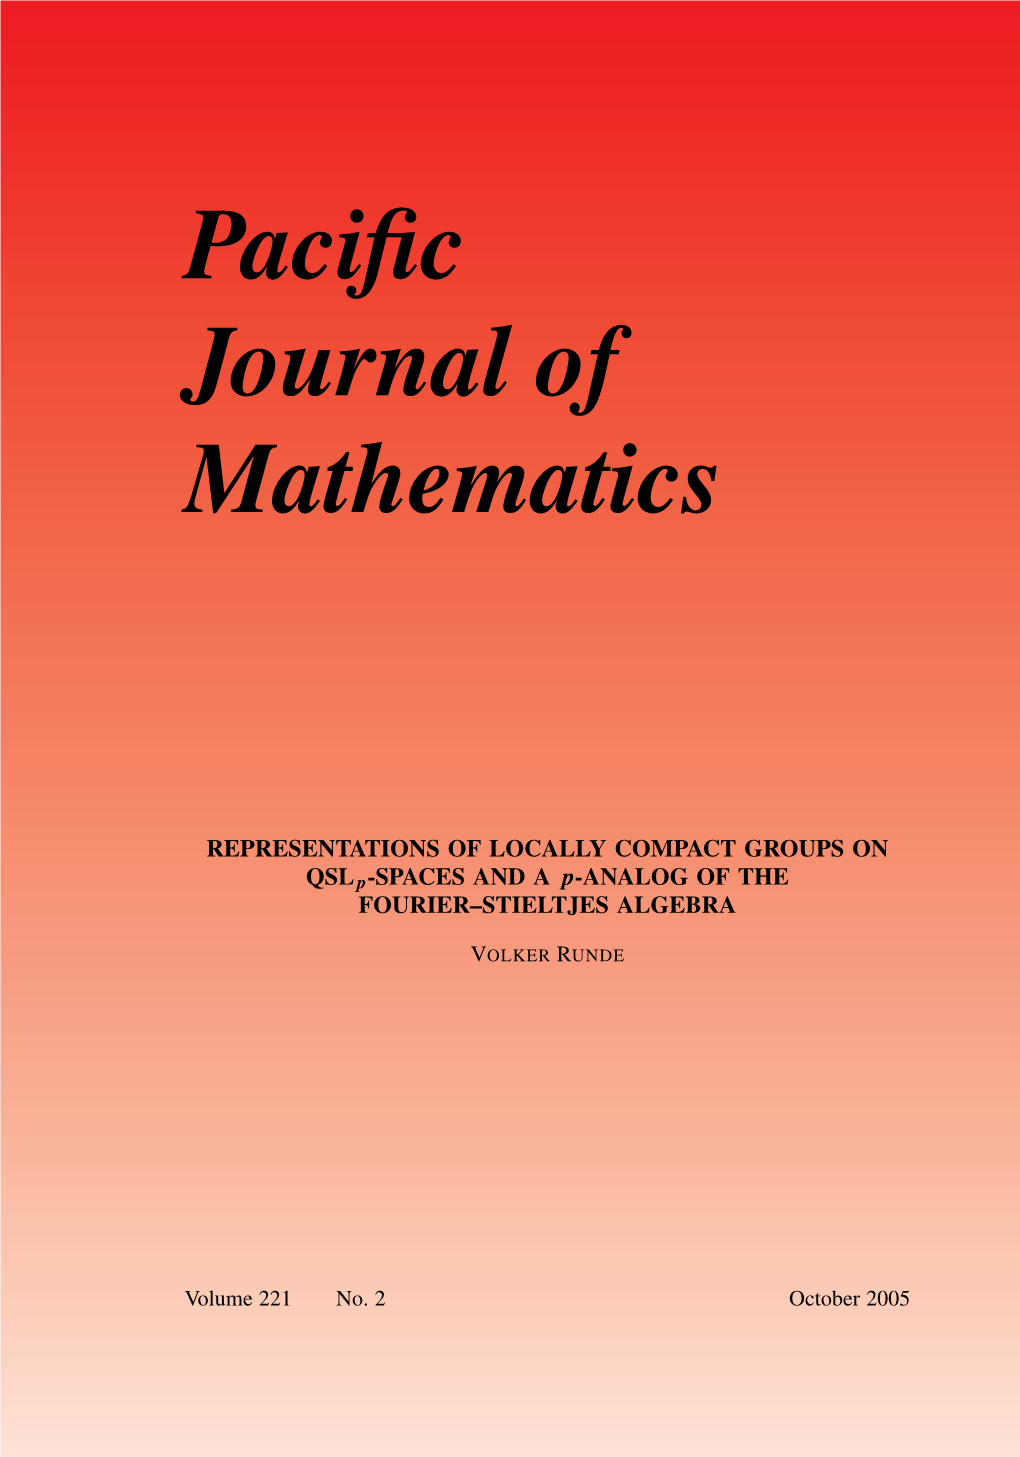 Representations of Locally Compact Groups on Qslp-Spaces and a P-Analog of the Fourier--Stieltjes Algebra